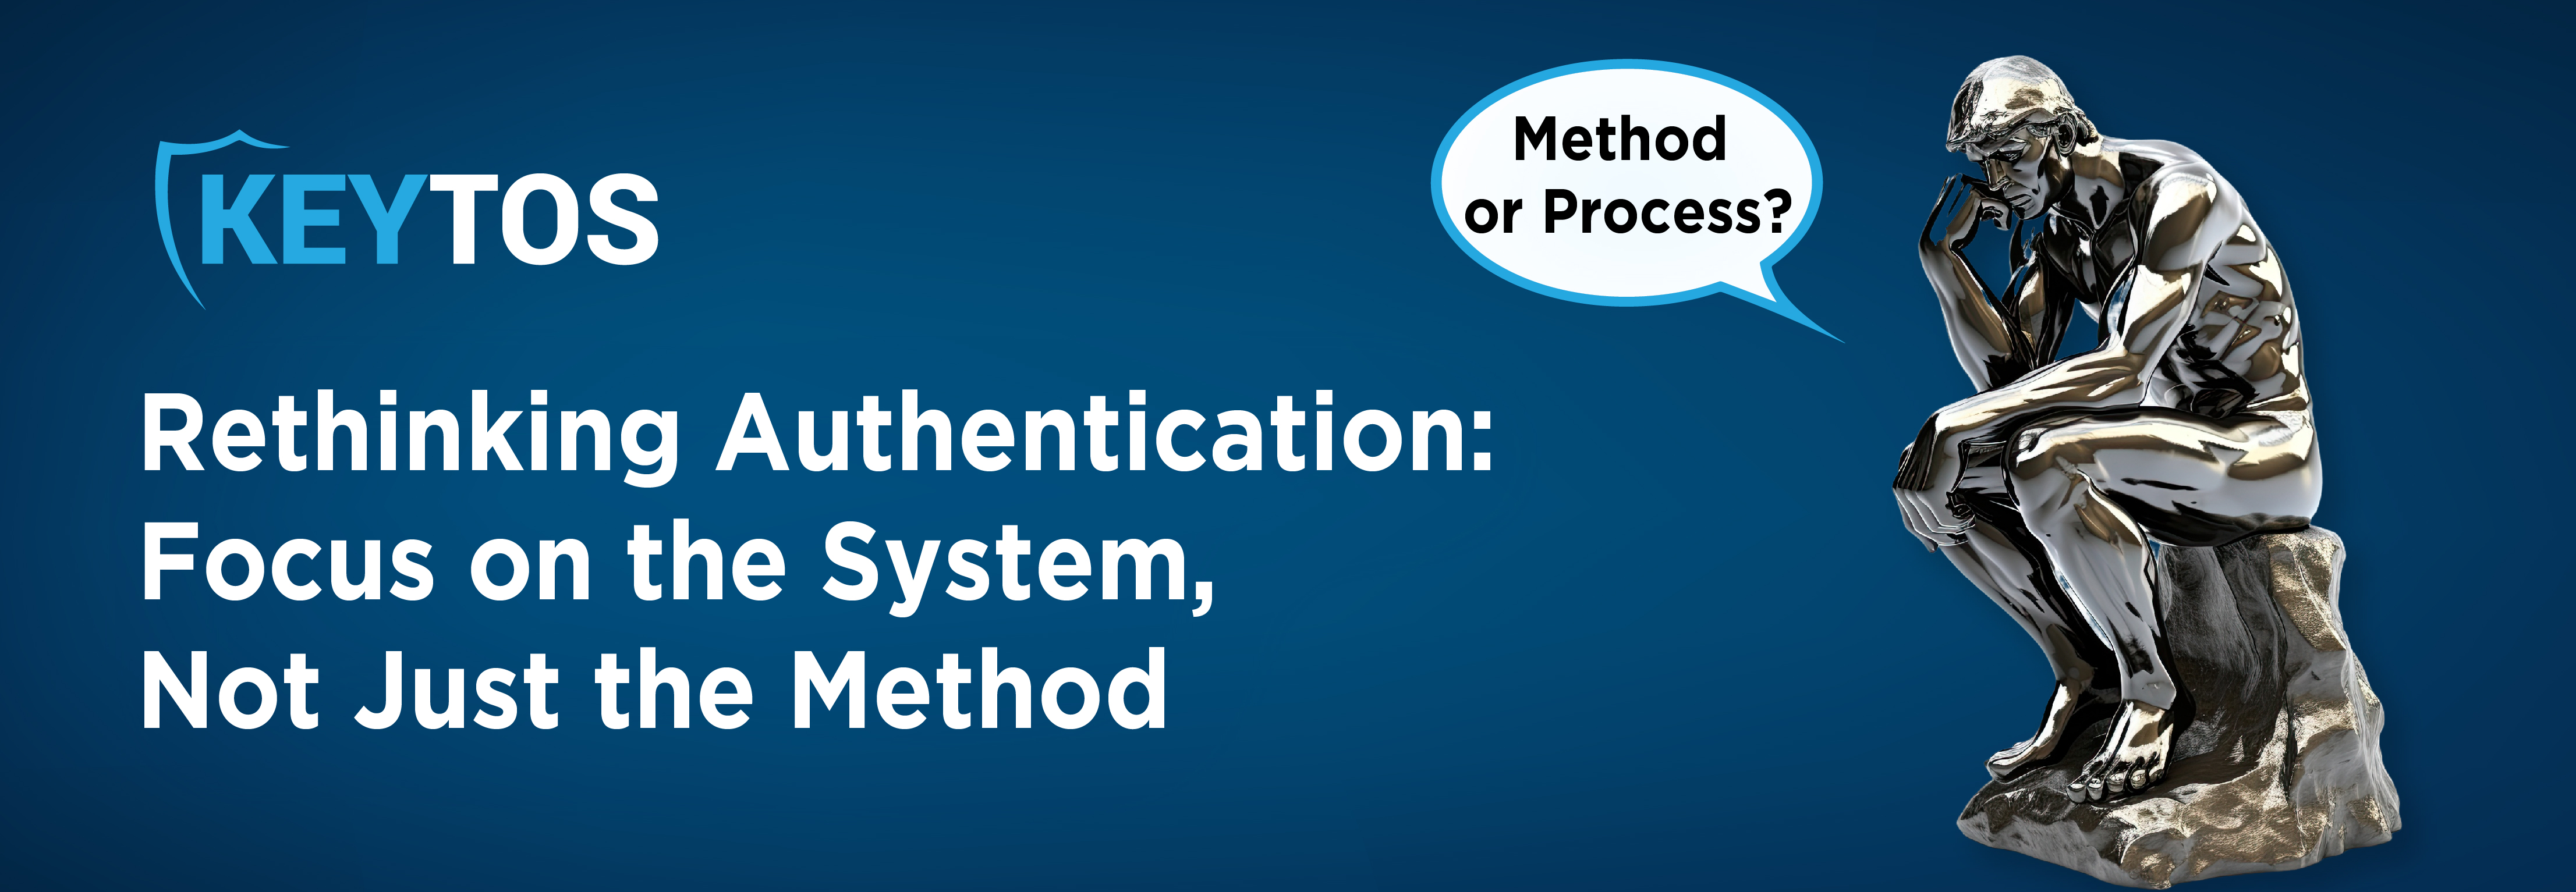 Rethinking Authentication - Focus on the WHOLE Process, Not Just the Method